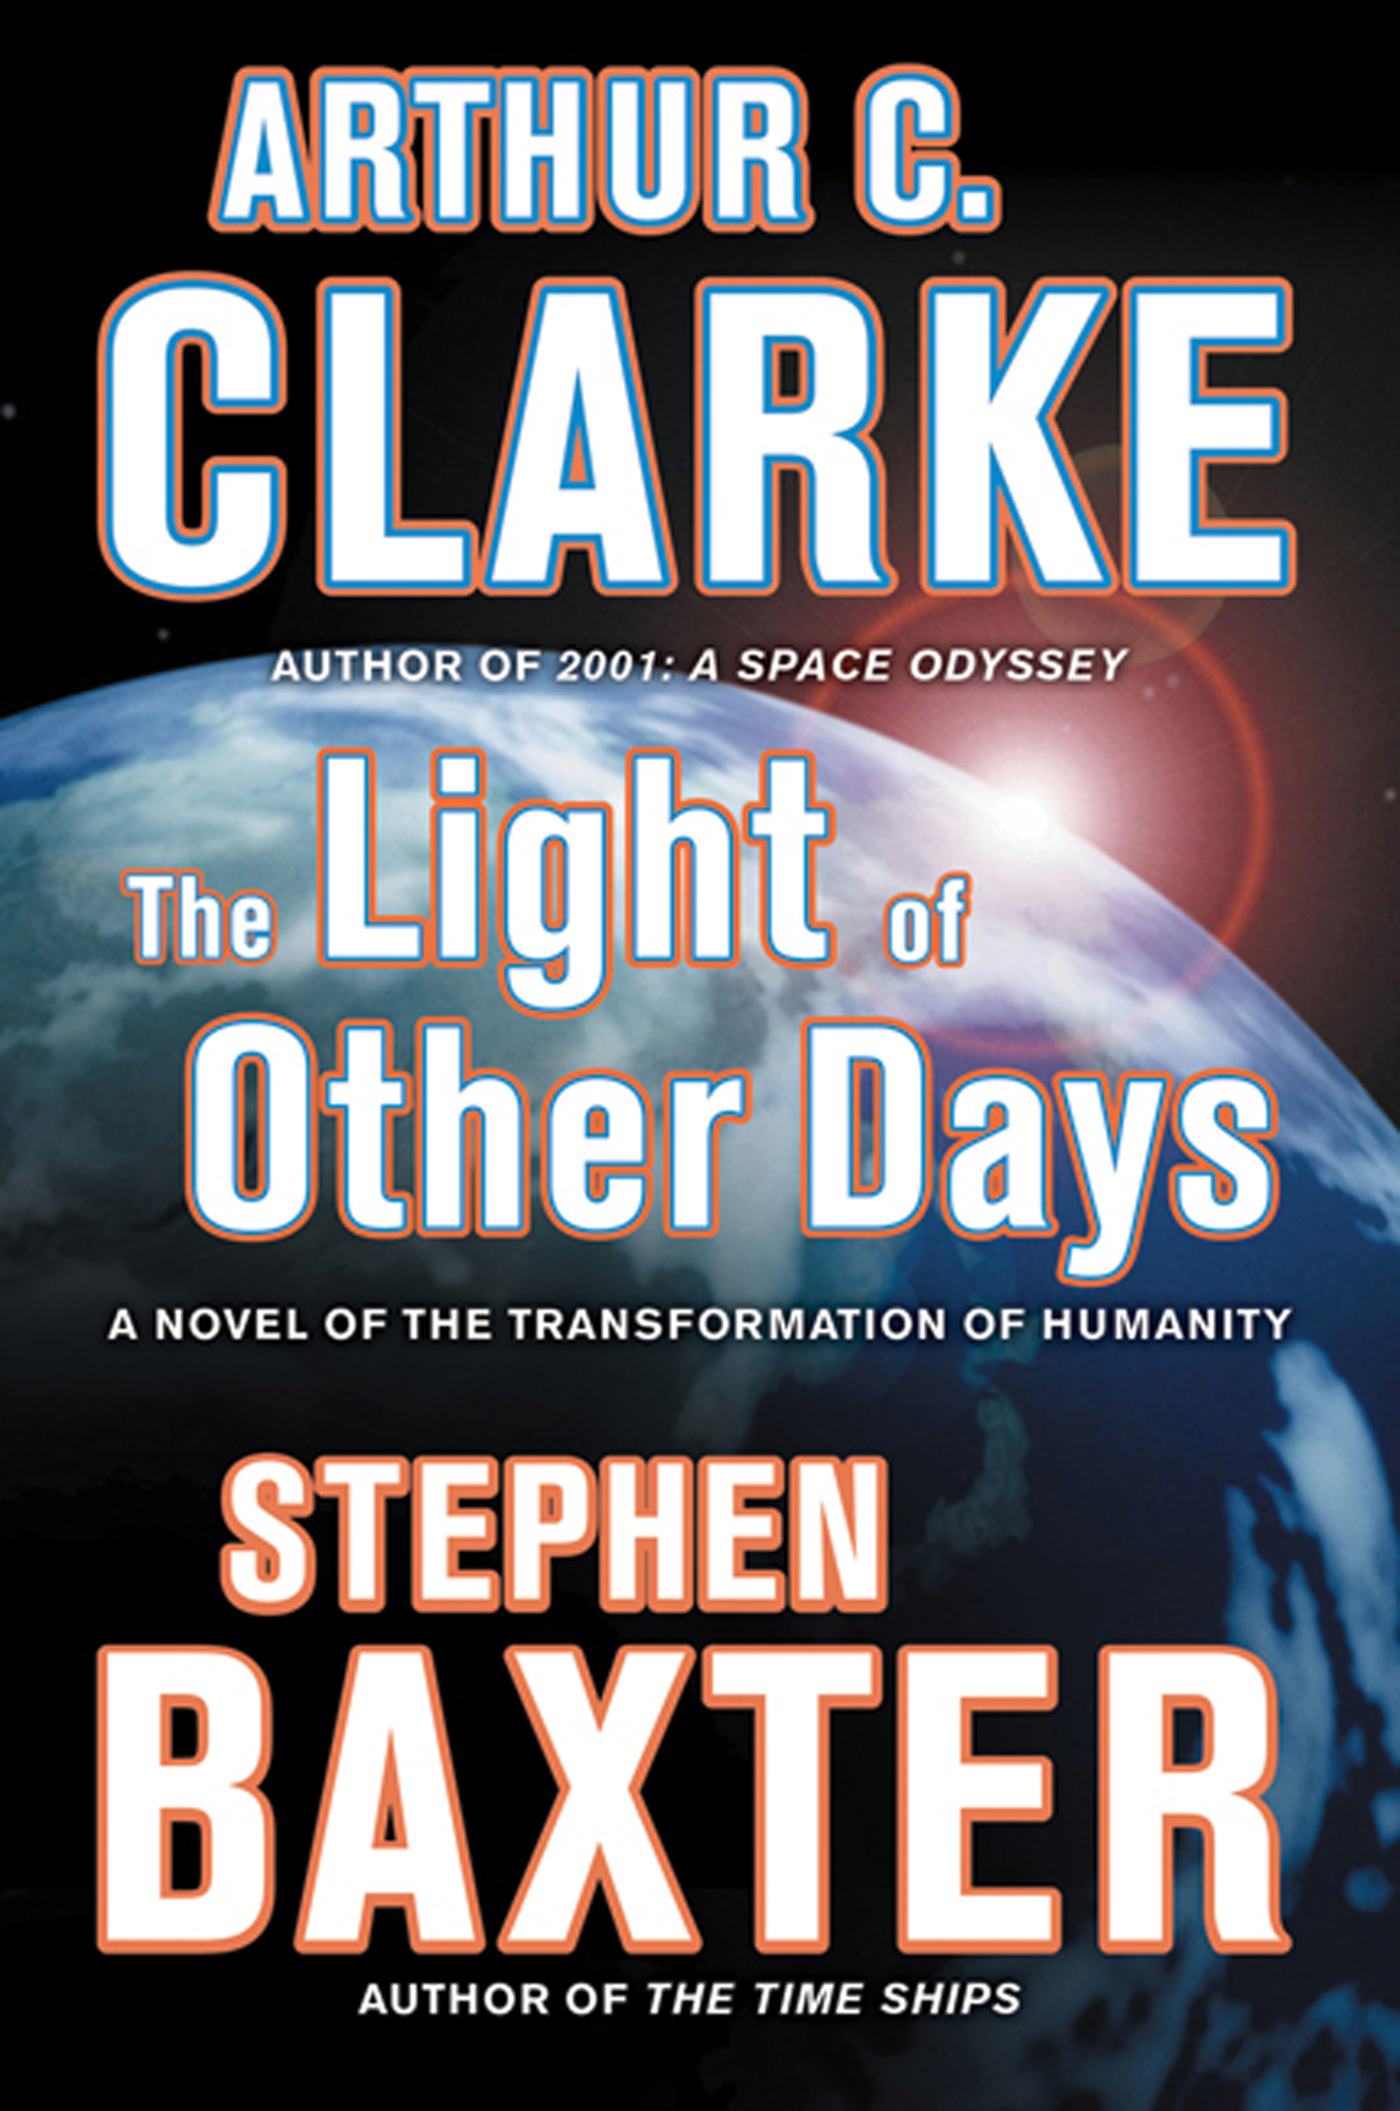 The Light of Other Days : A Novel of the Transformation of Humanity by Arthur C. Clarke, Stephen Baxter